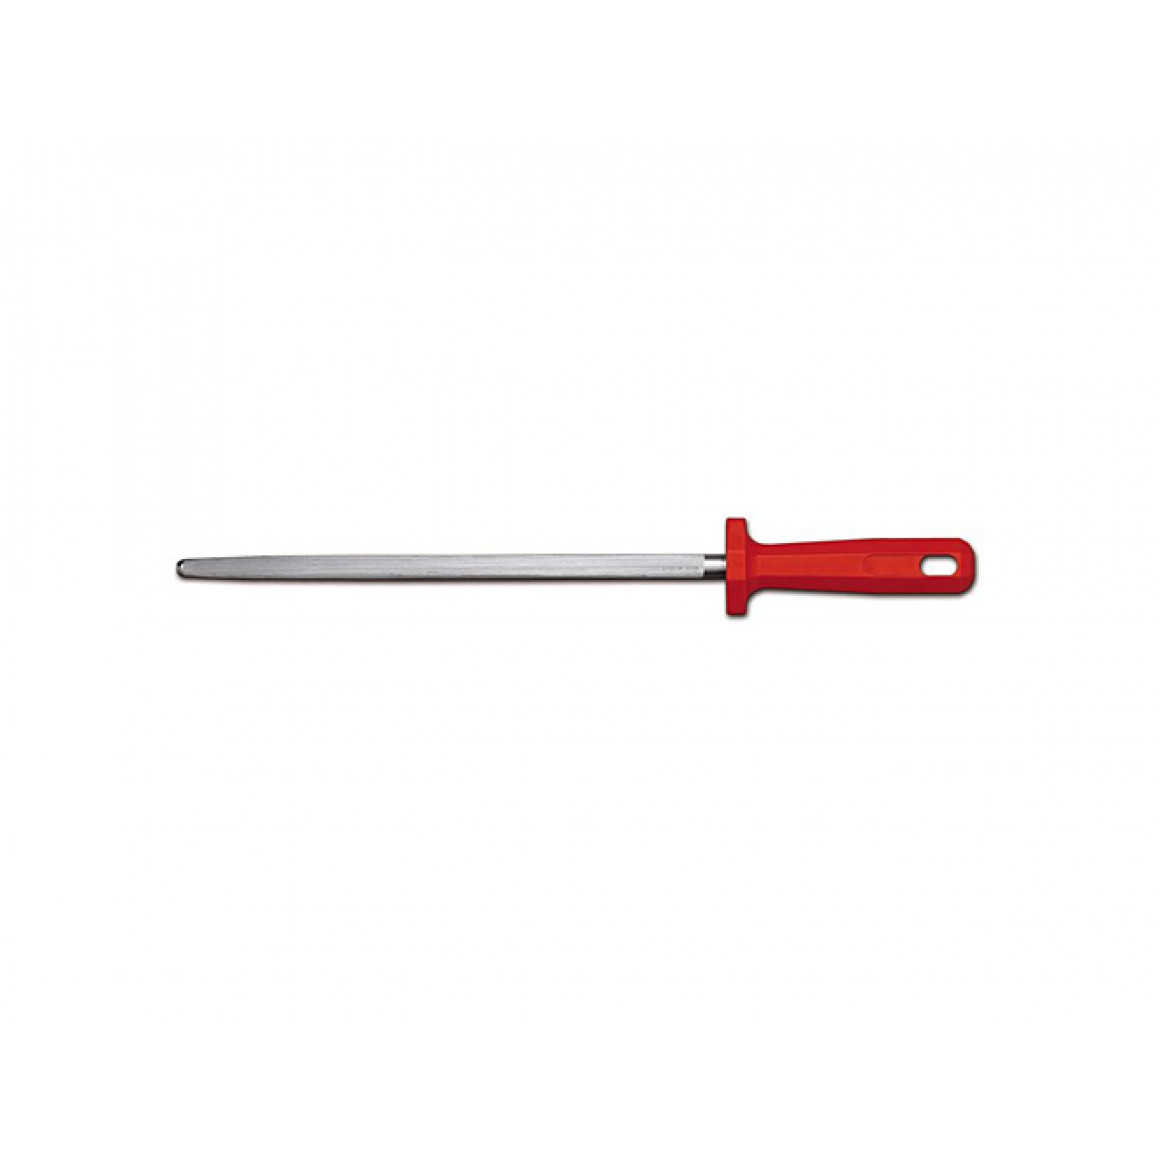 Supra Red - Chrome-plated sharpening steel/L30